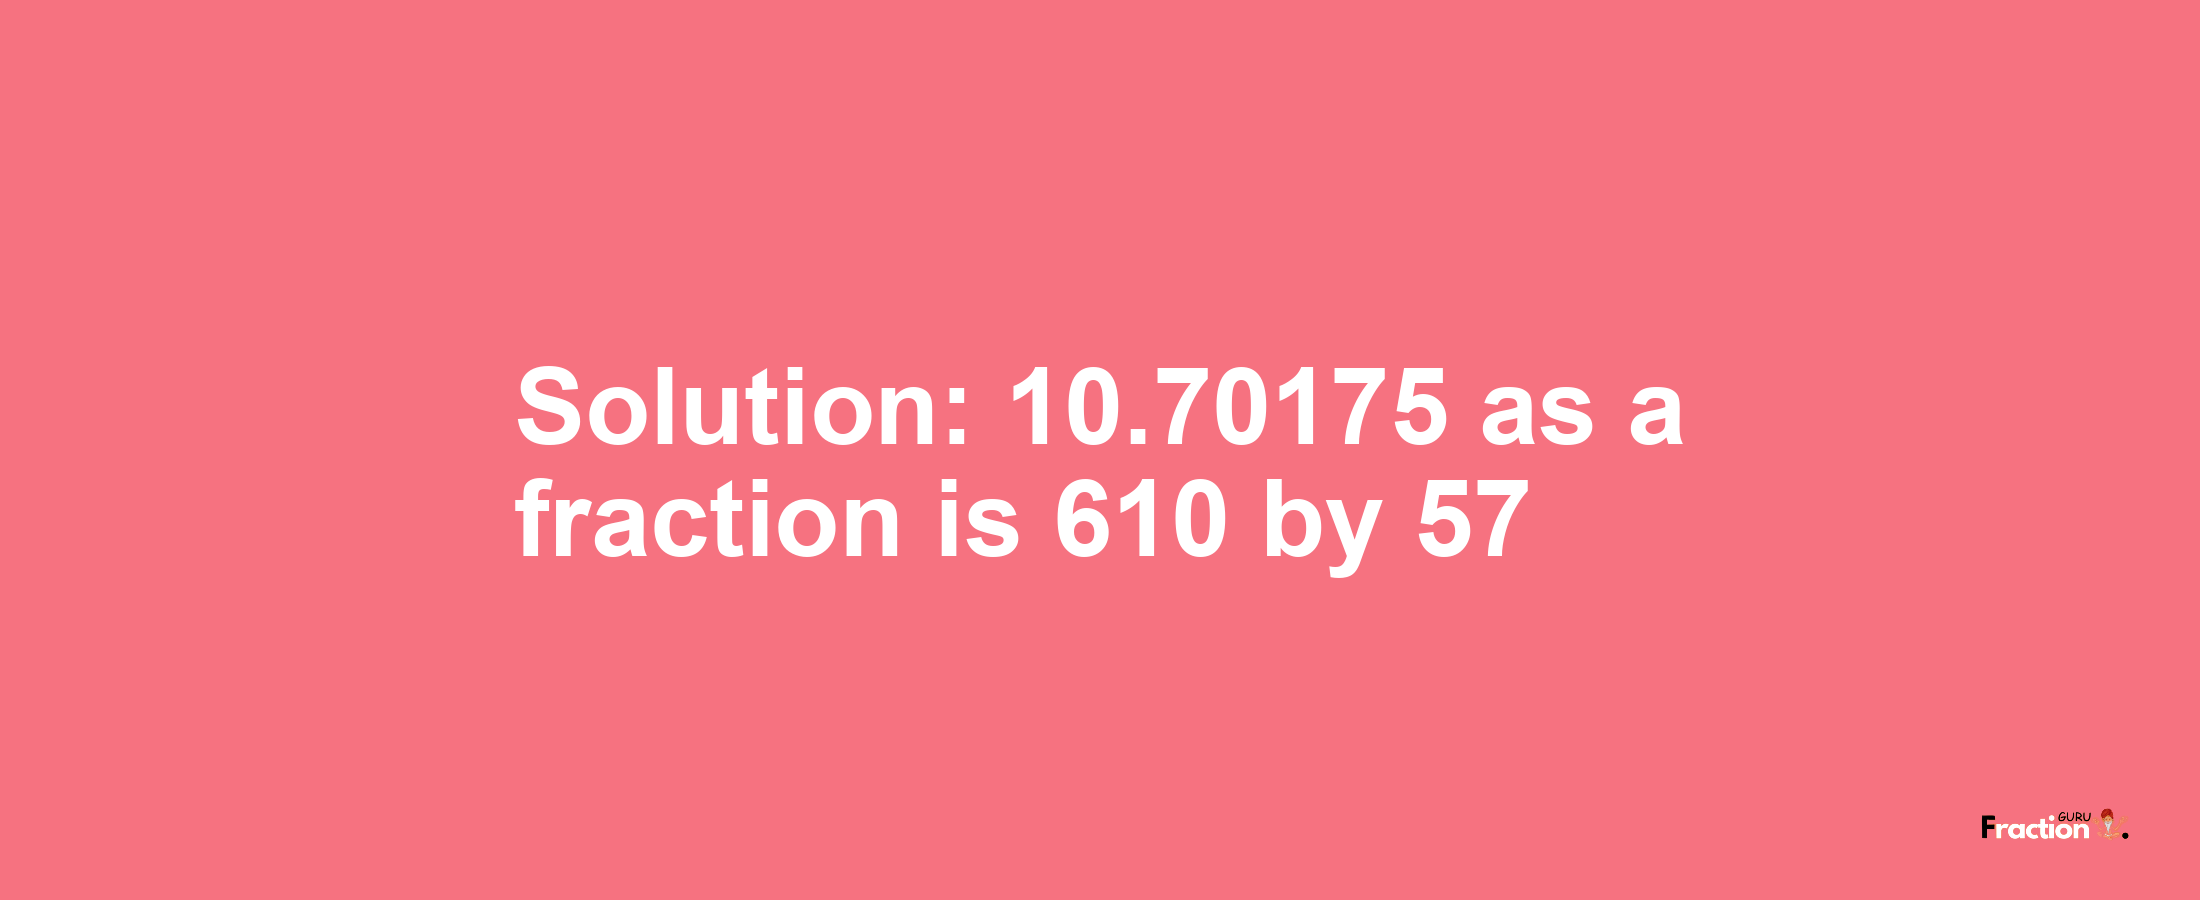 Solution:10.70175 as a fraction is 610/57